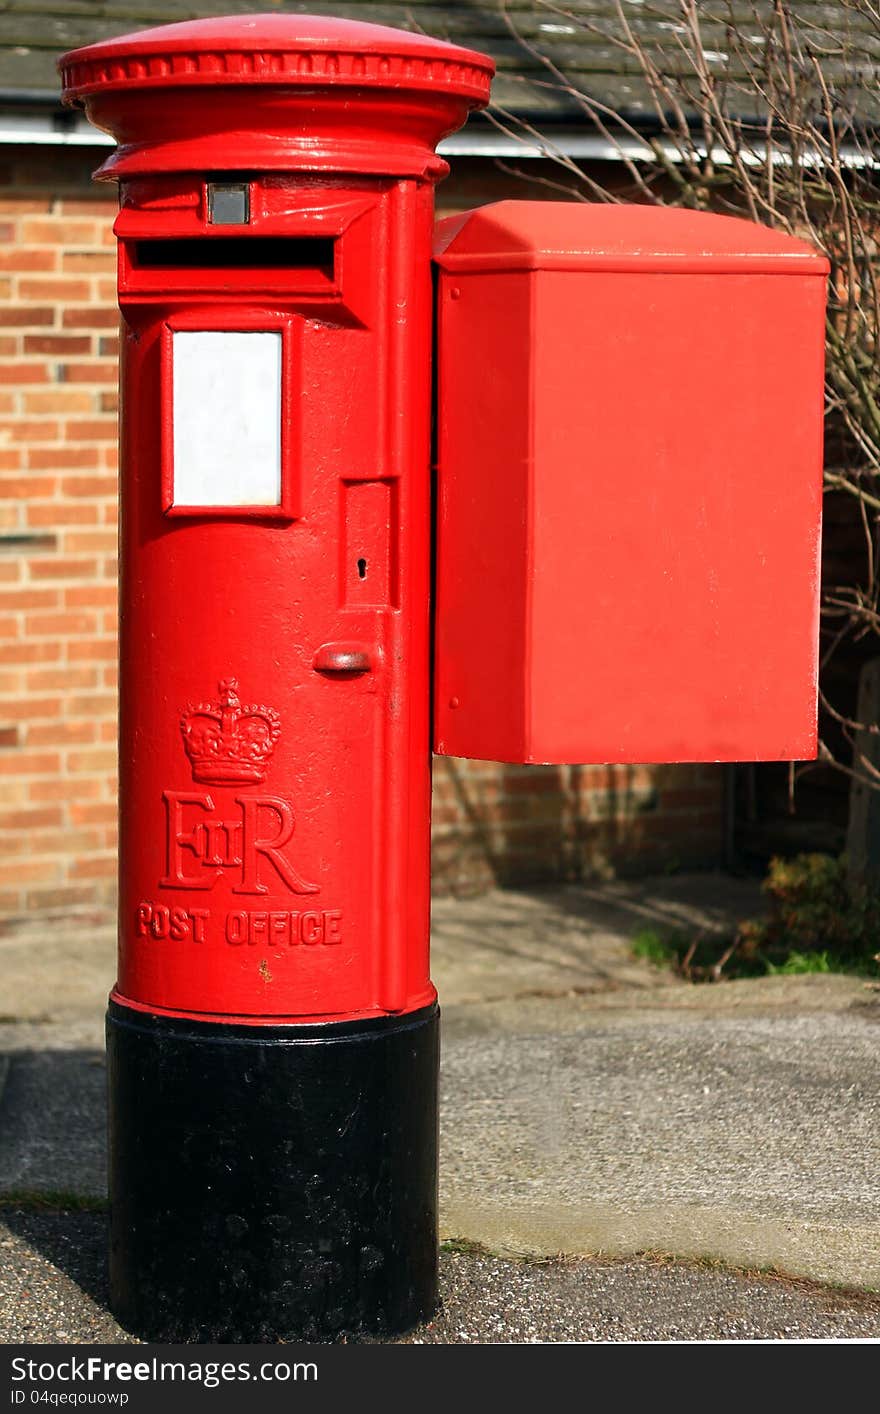 Image of a red british post box in London. Image of a red british post box in London